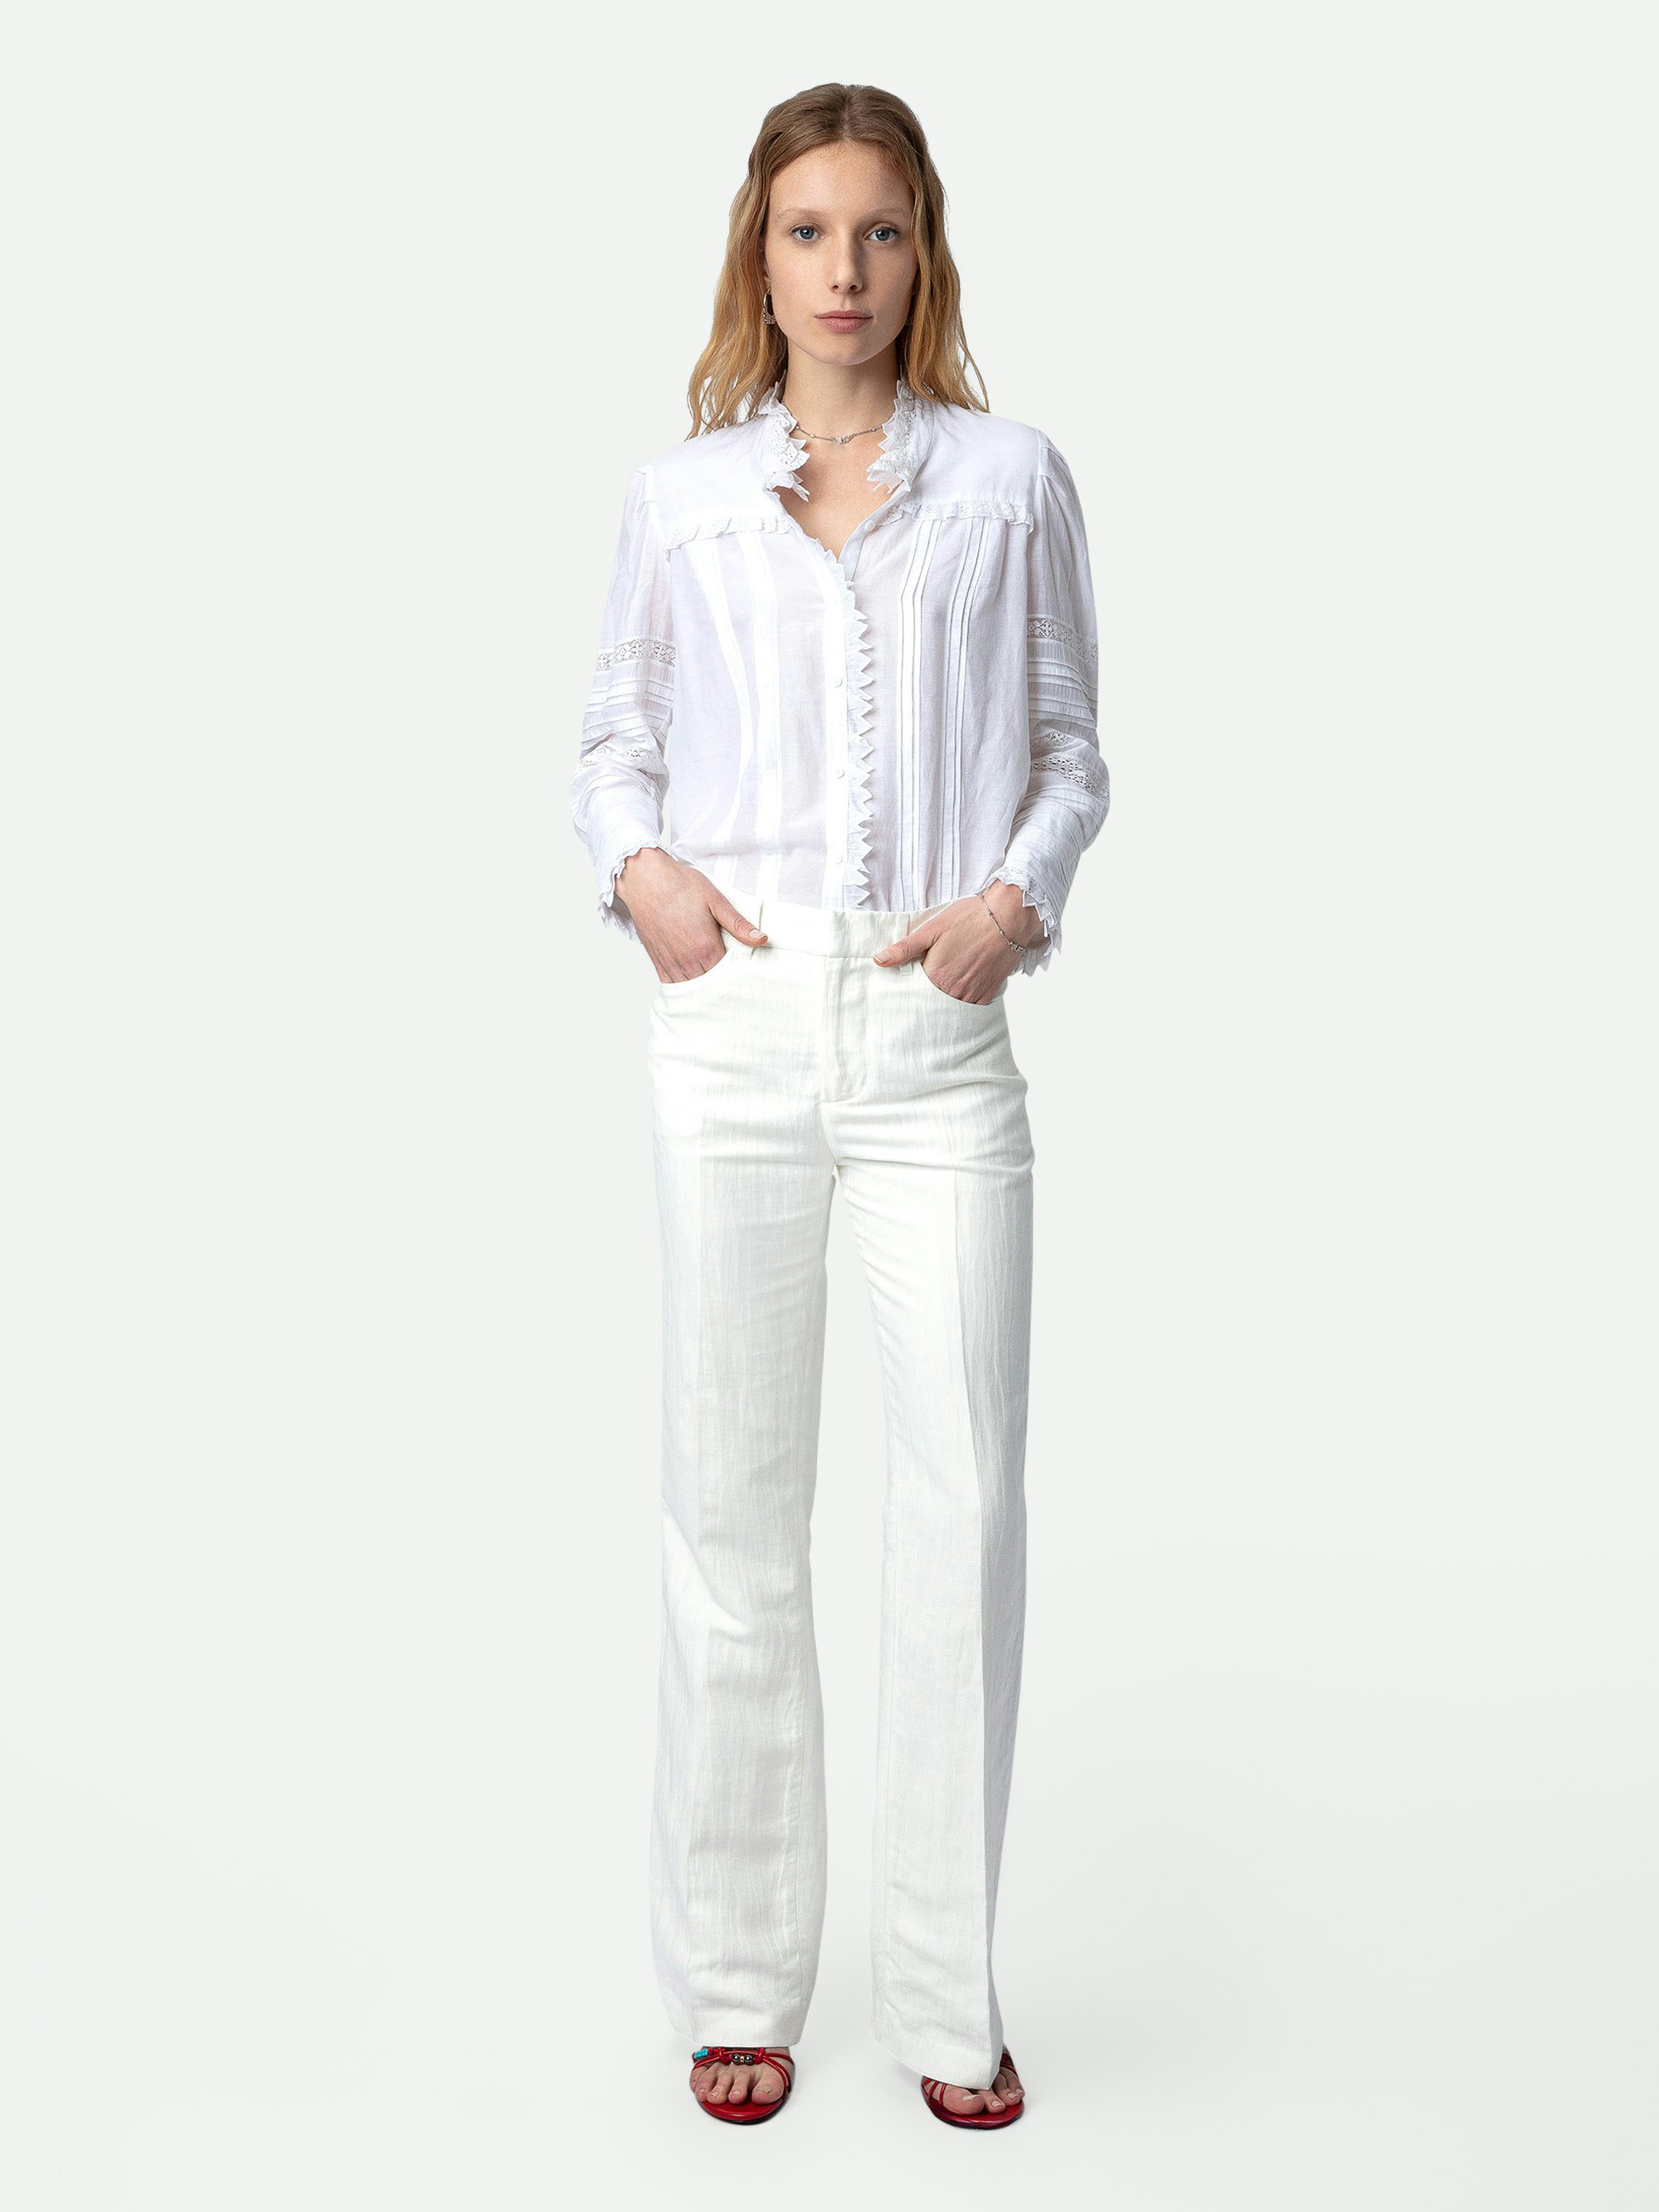 Pistol Trousers - White linen flared tailored trousers with pockets and pleats.